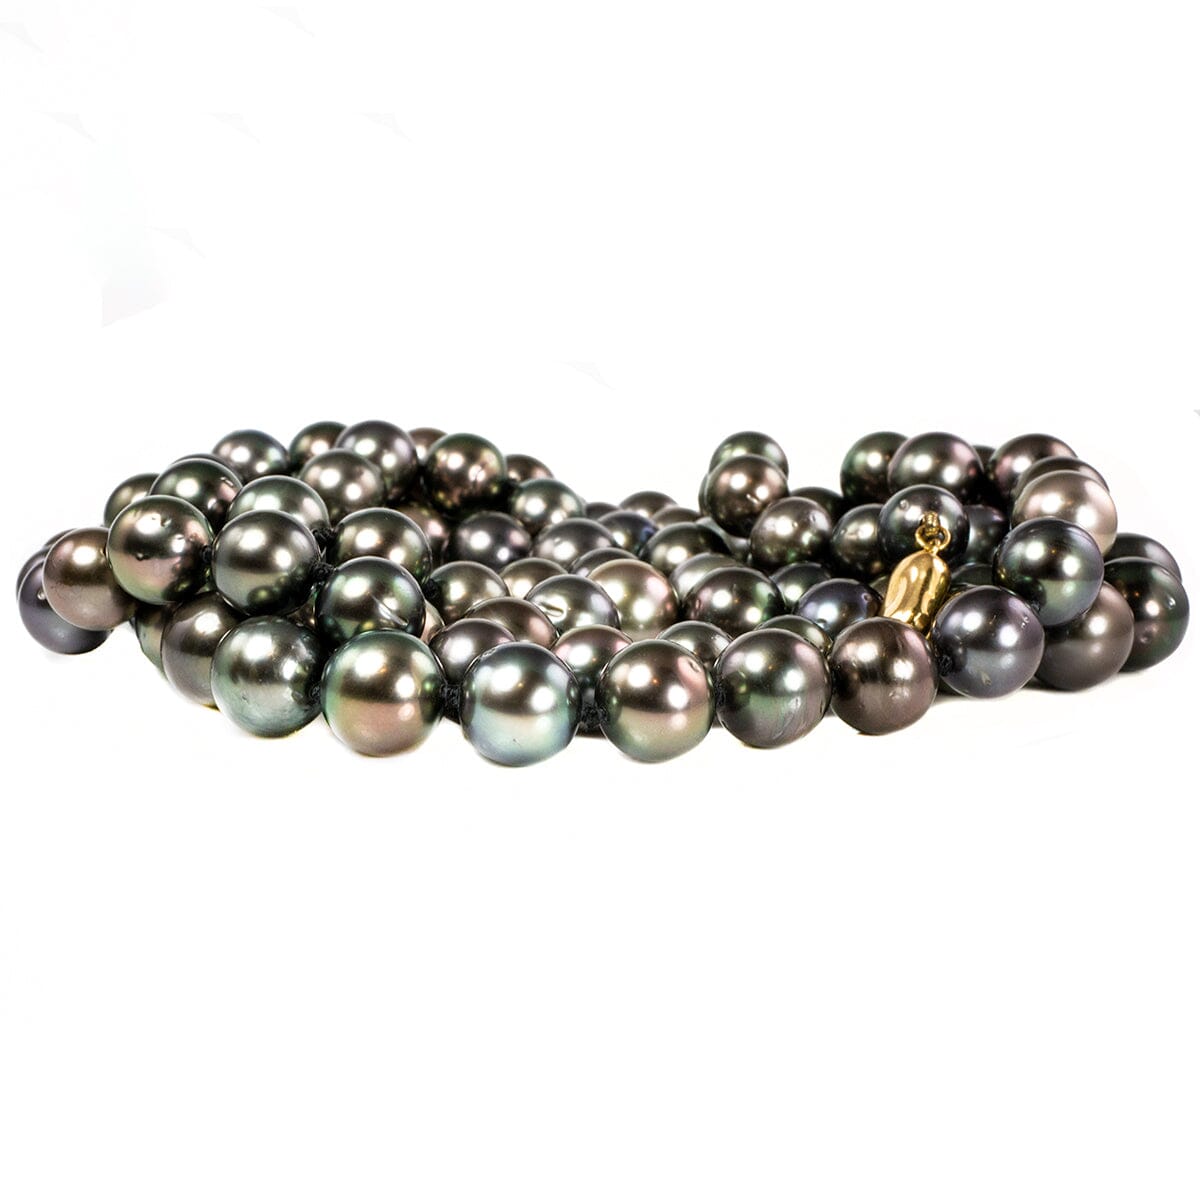 Great Lakes Boutique Dyed Pearl Necklace with 18 k Gold Clasp